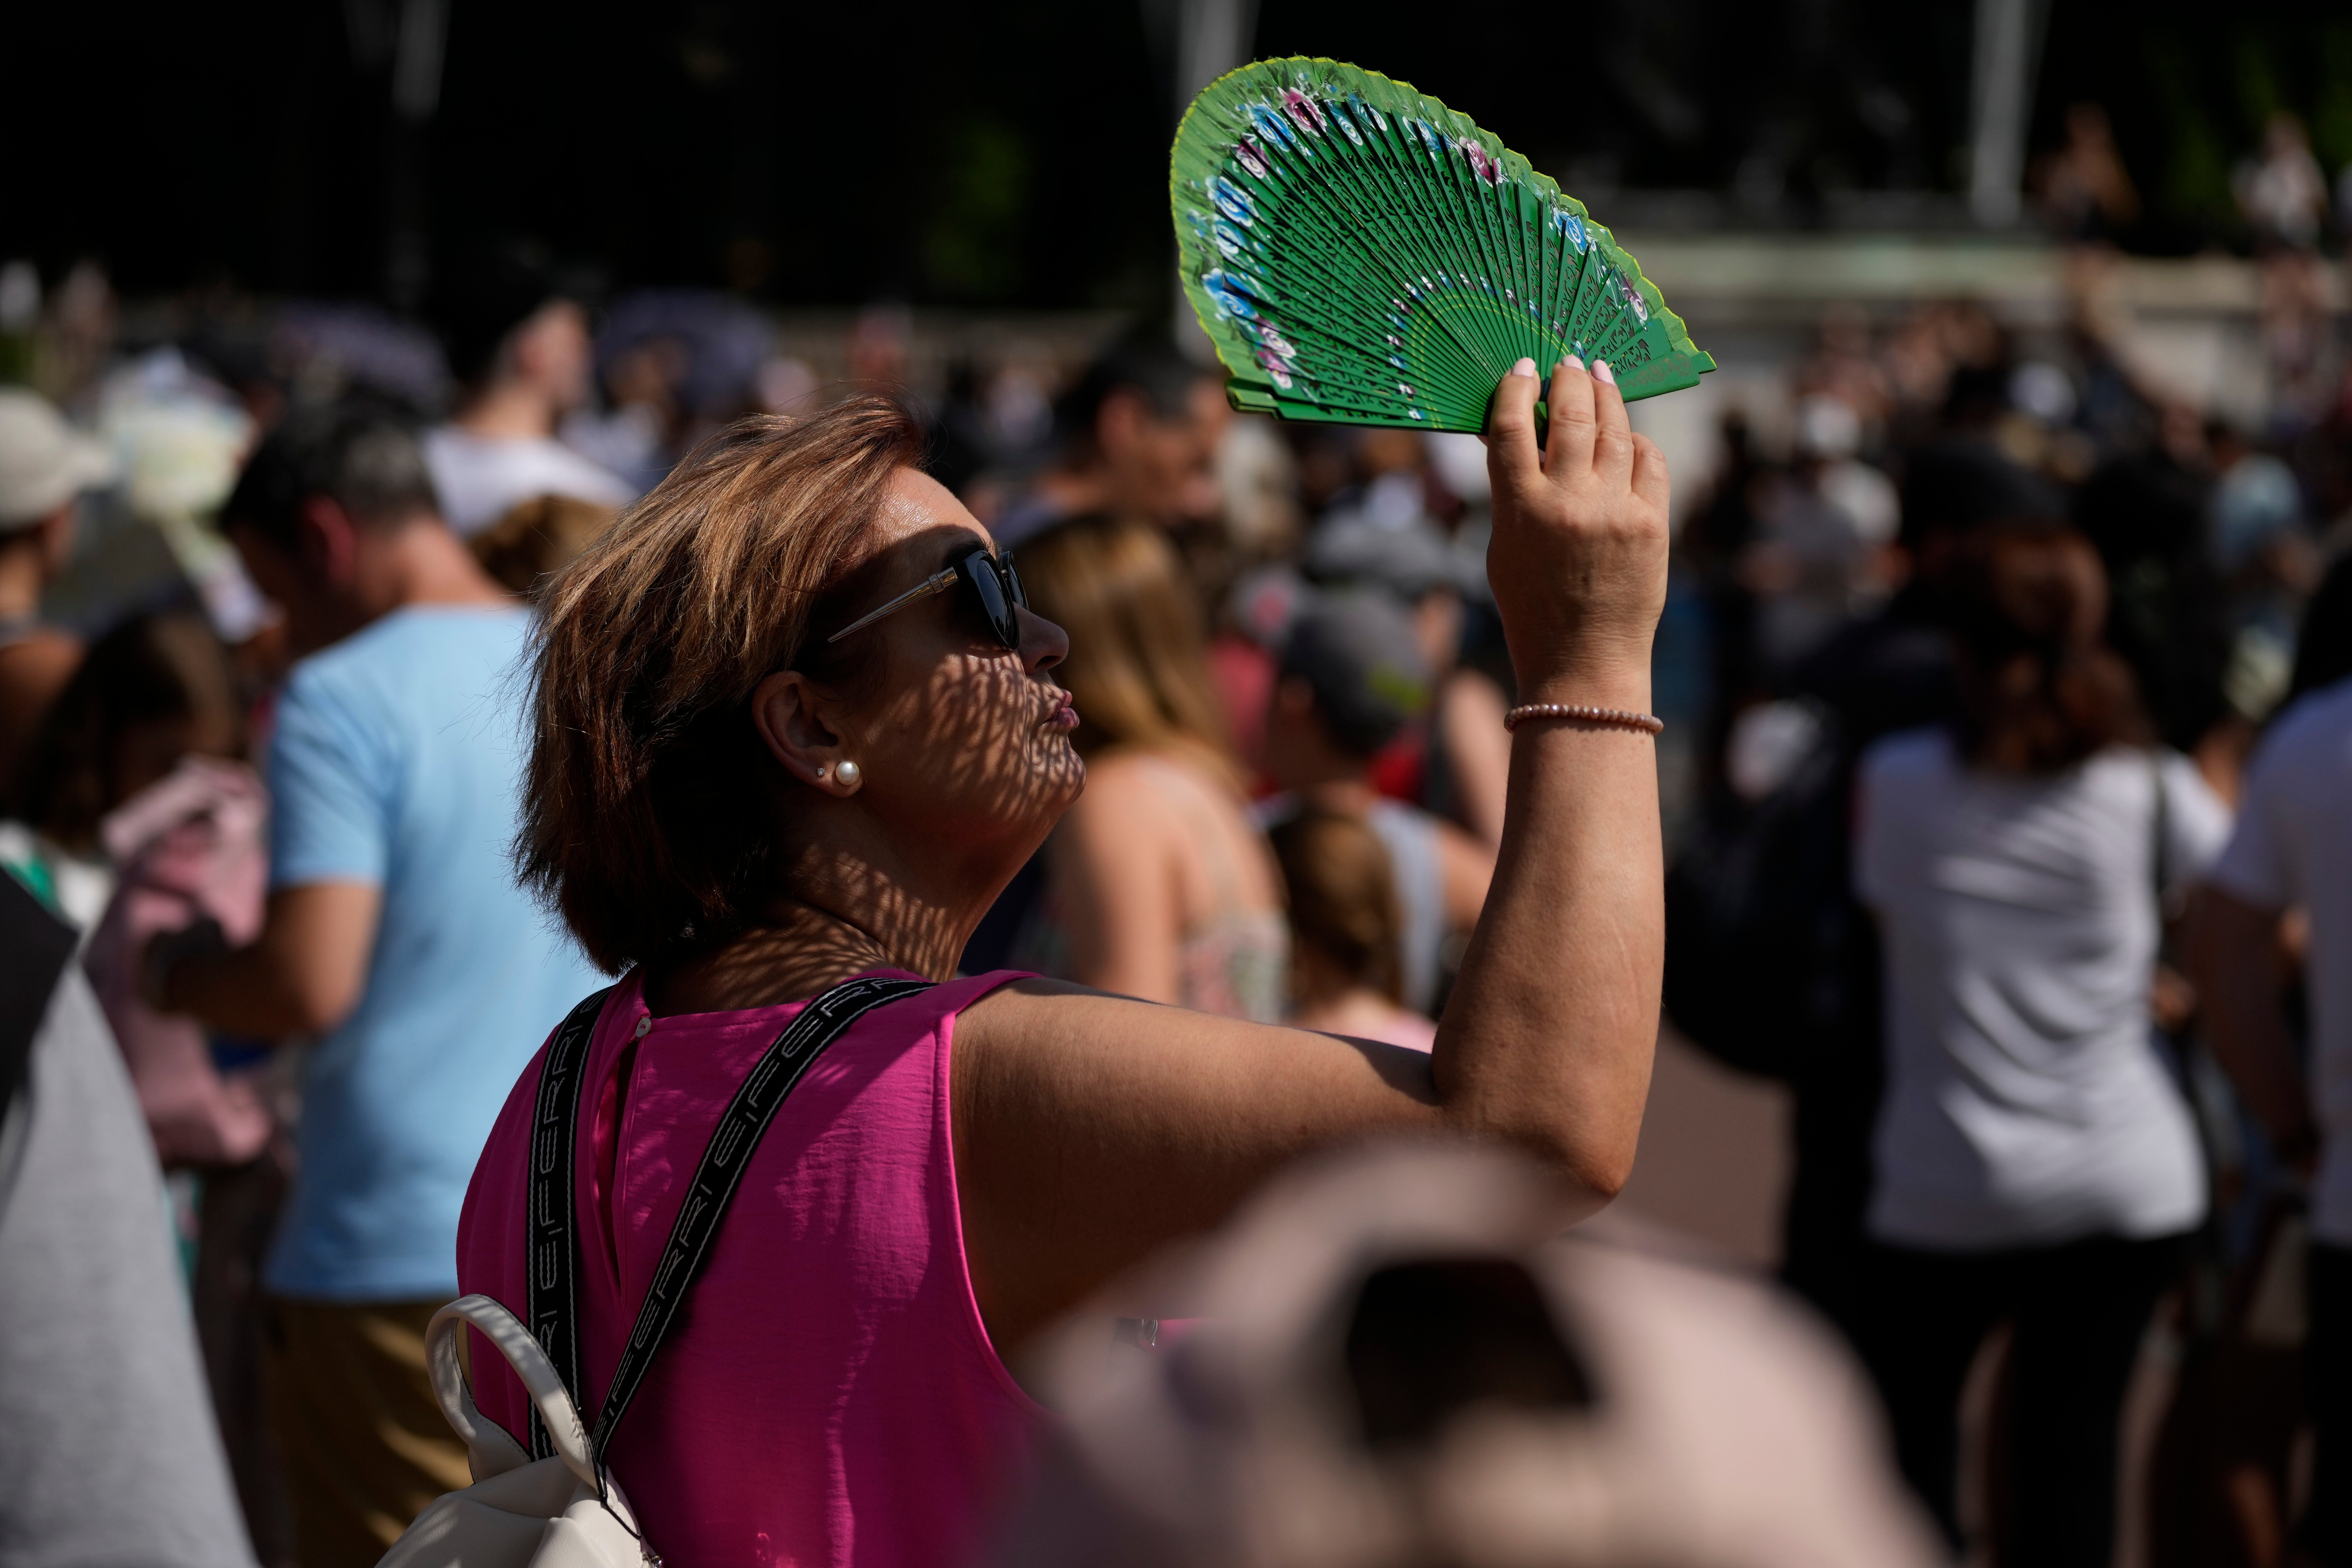 A tourist uses a fan to shade her face from the sun